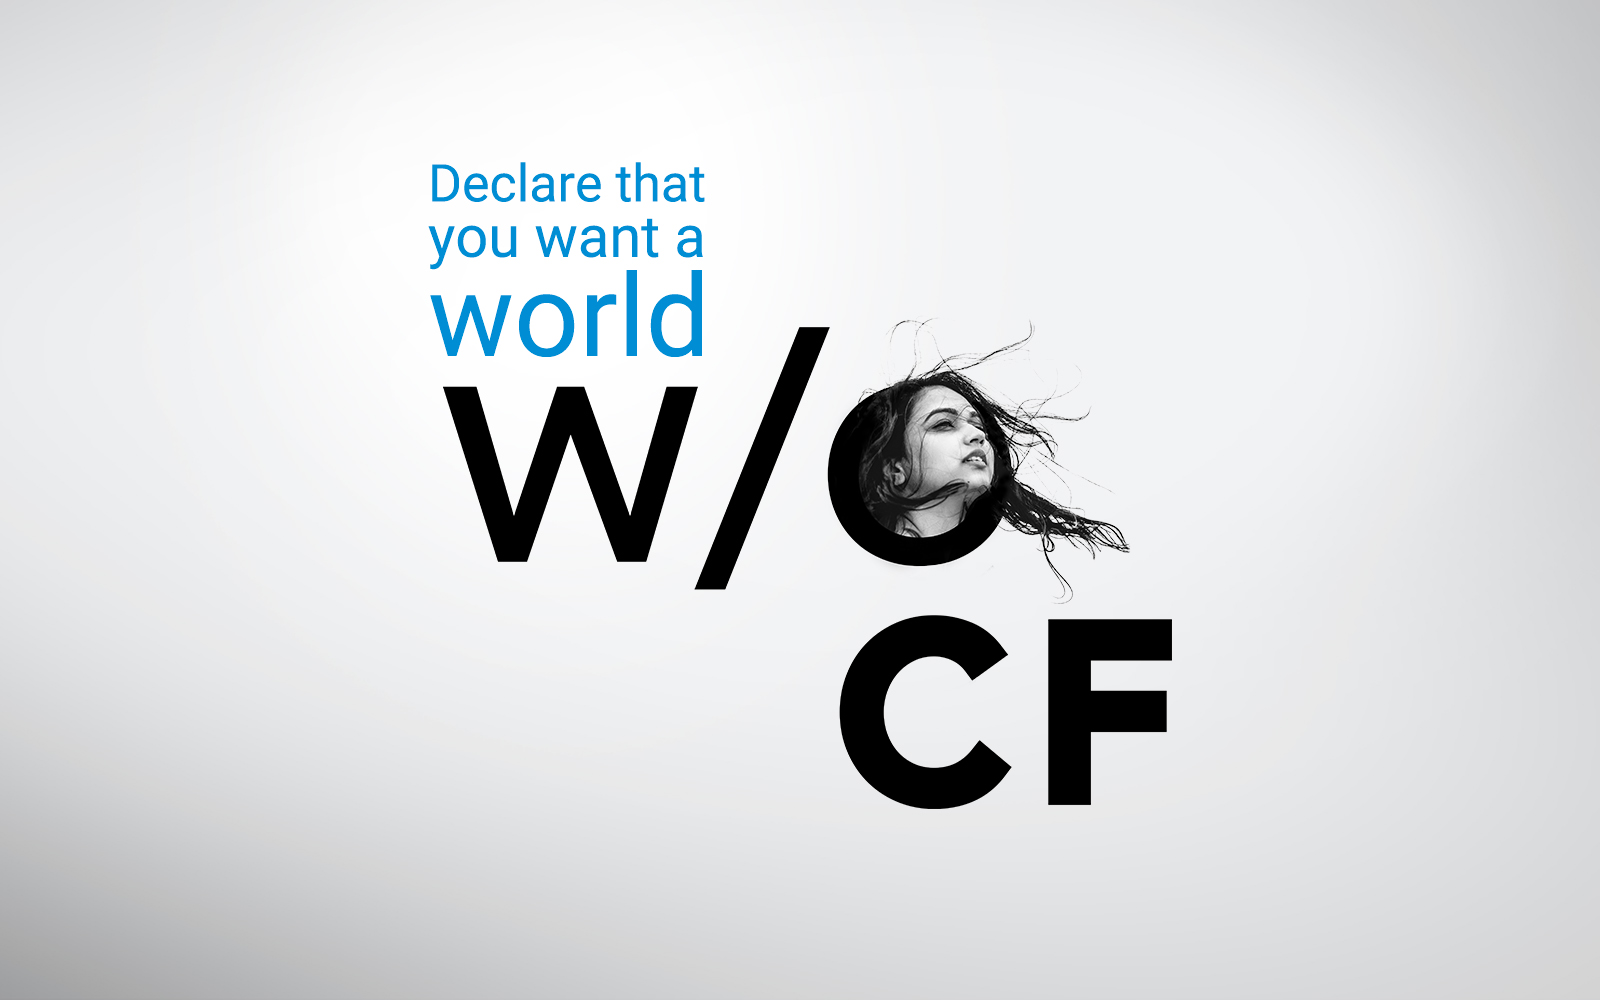 Declare that you want a world W/O CF.